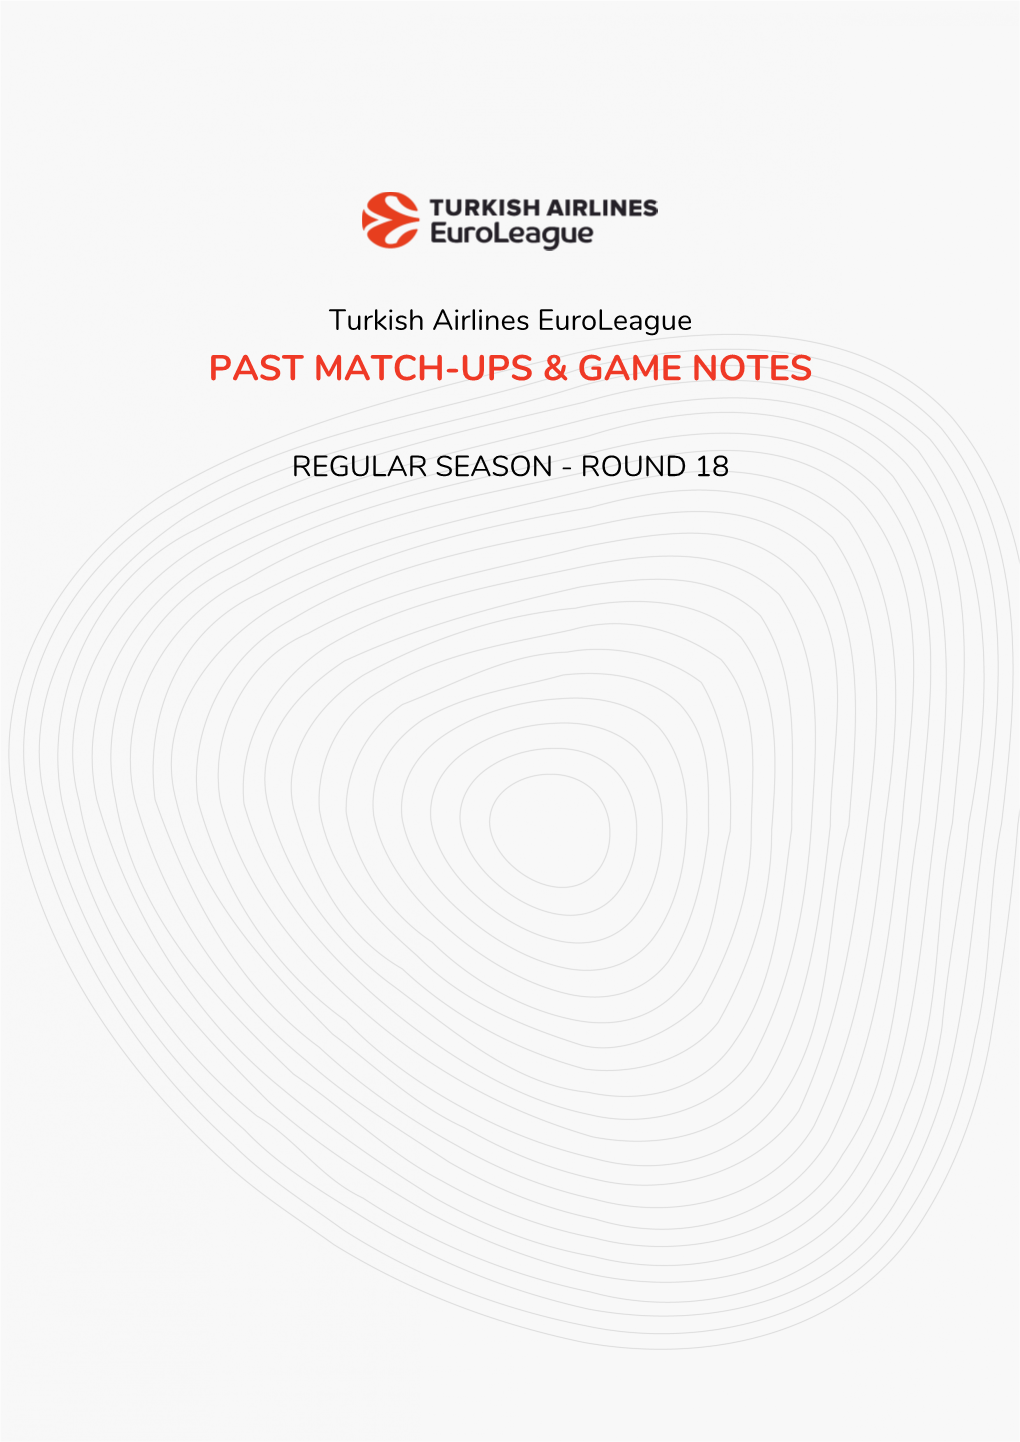 Past Match-Ups & Game Notes